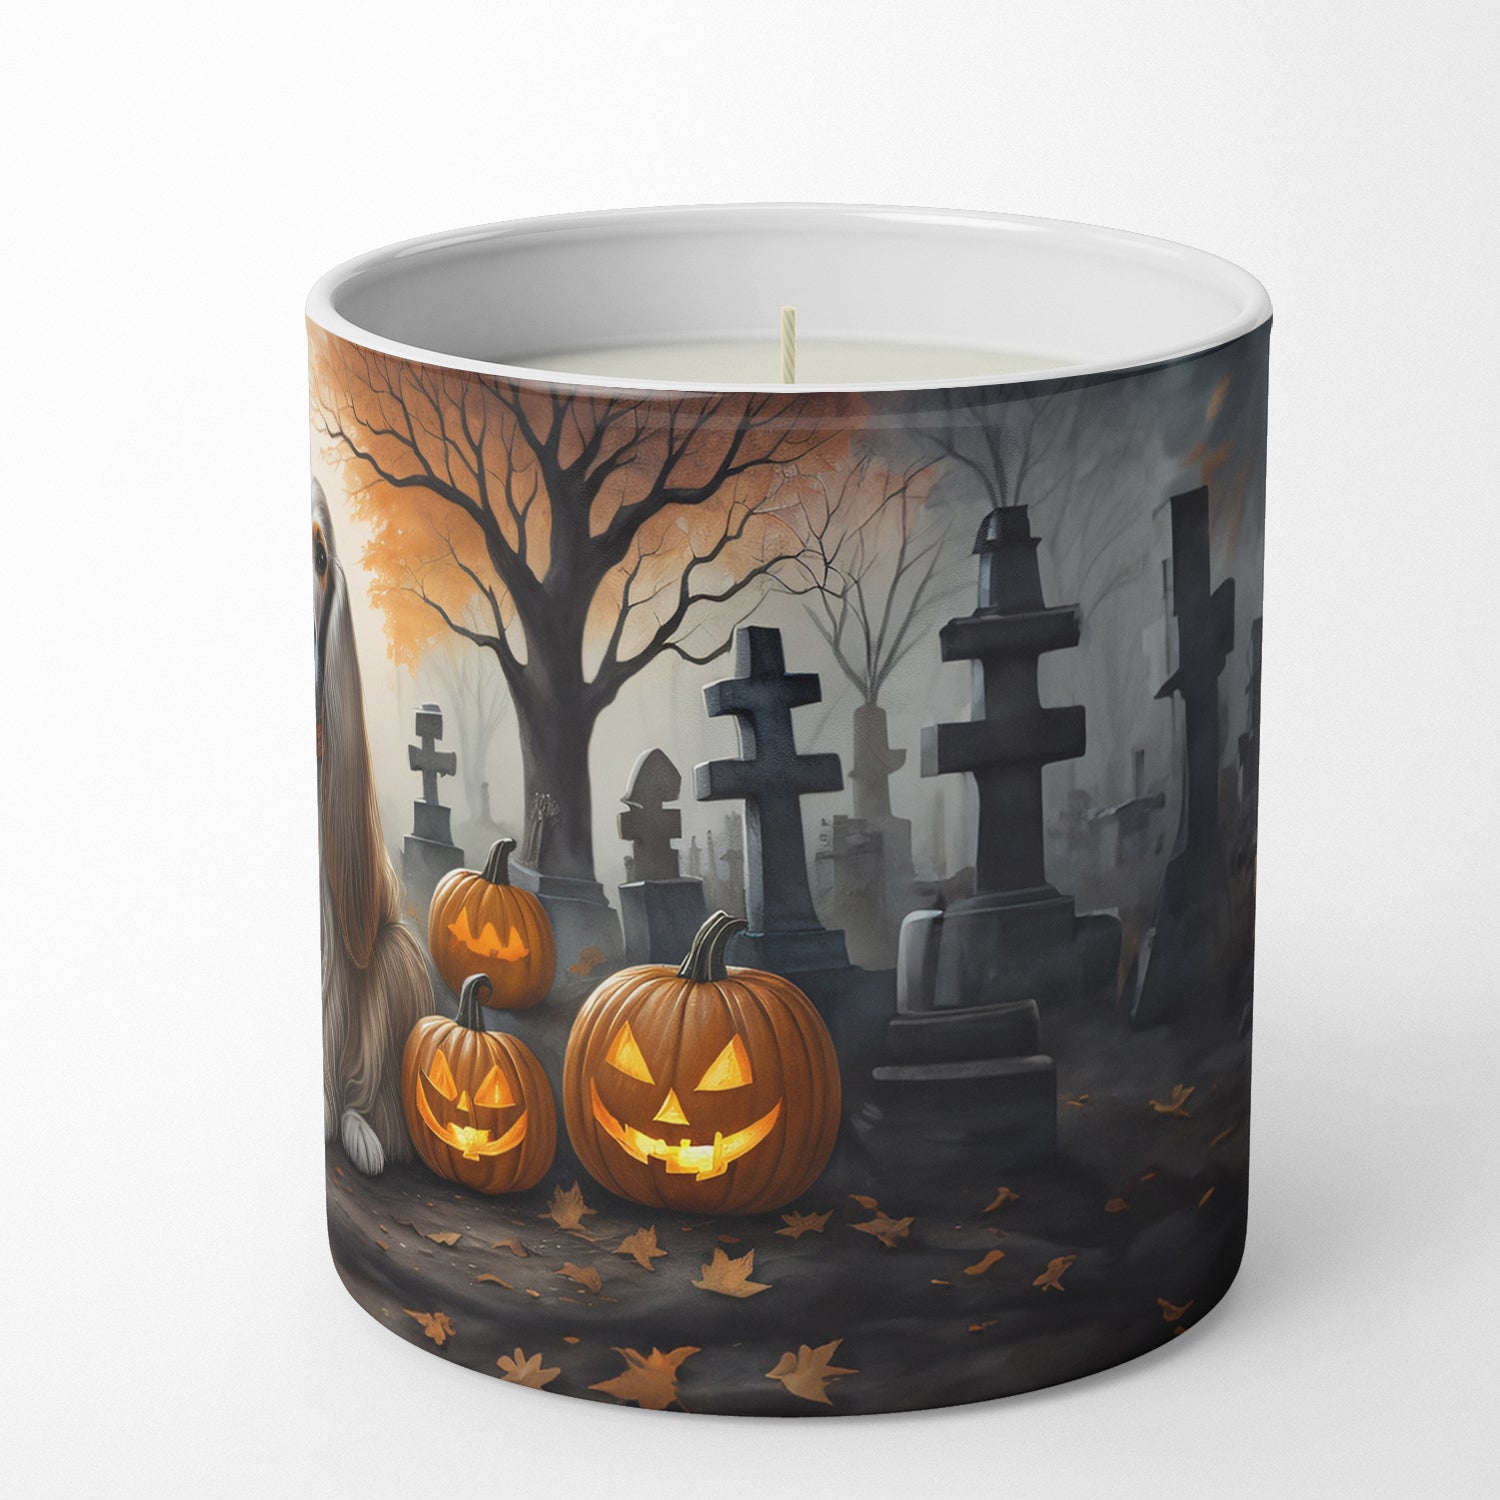 Afghan Hound Spooky Halloween Decorative Soy Candle